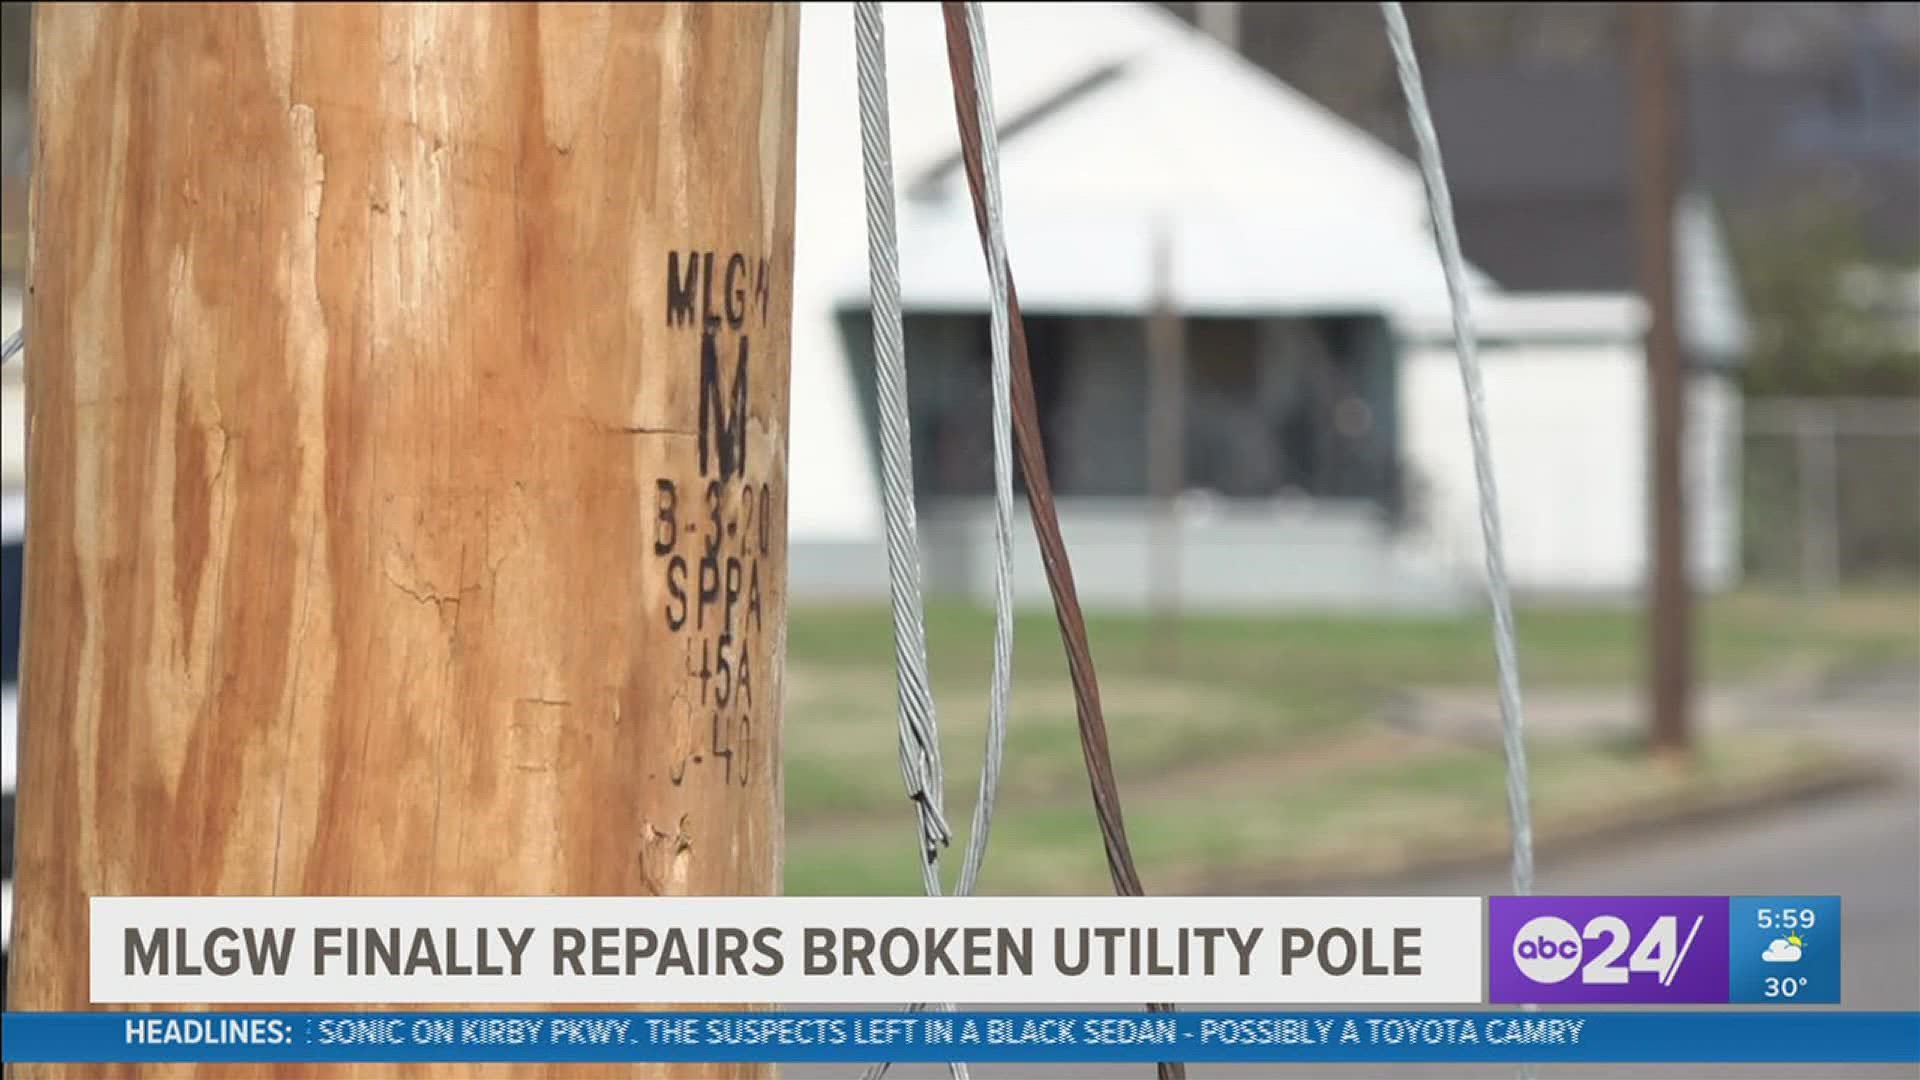 One resident said he got the runaround trying to get a utility pole problem fixed, until ABC 24 News got involved.